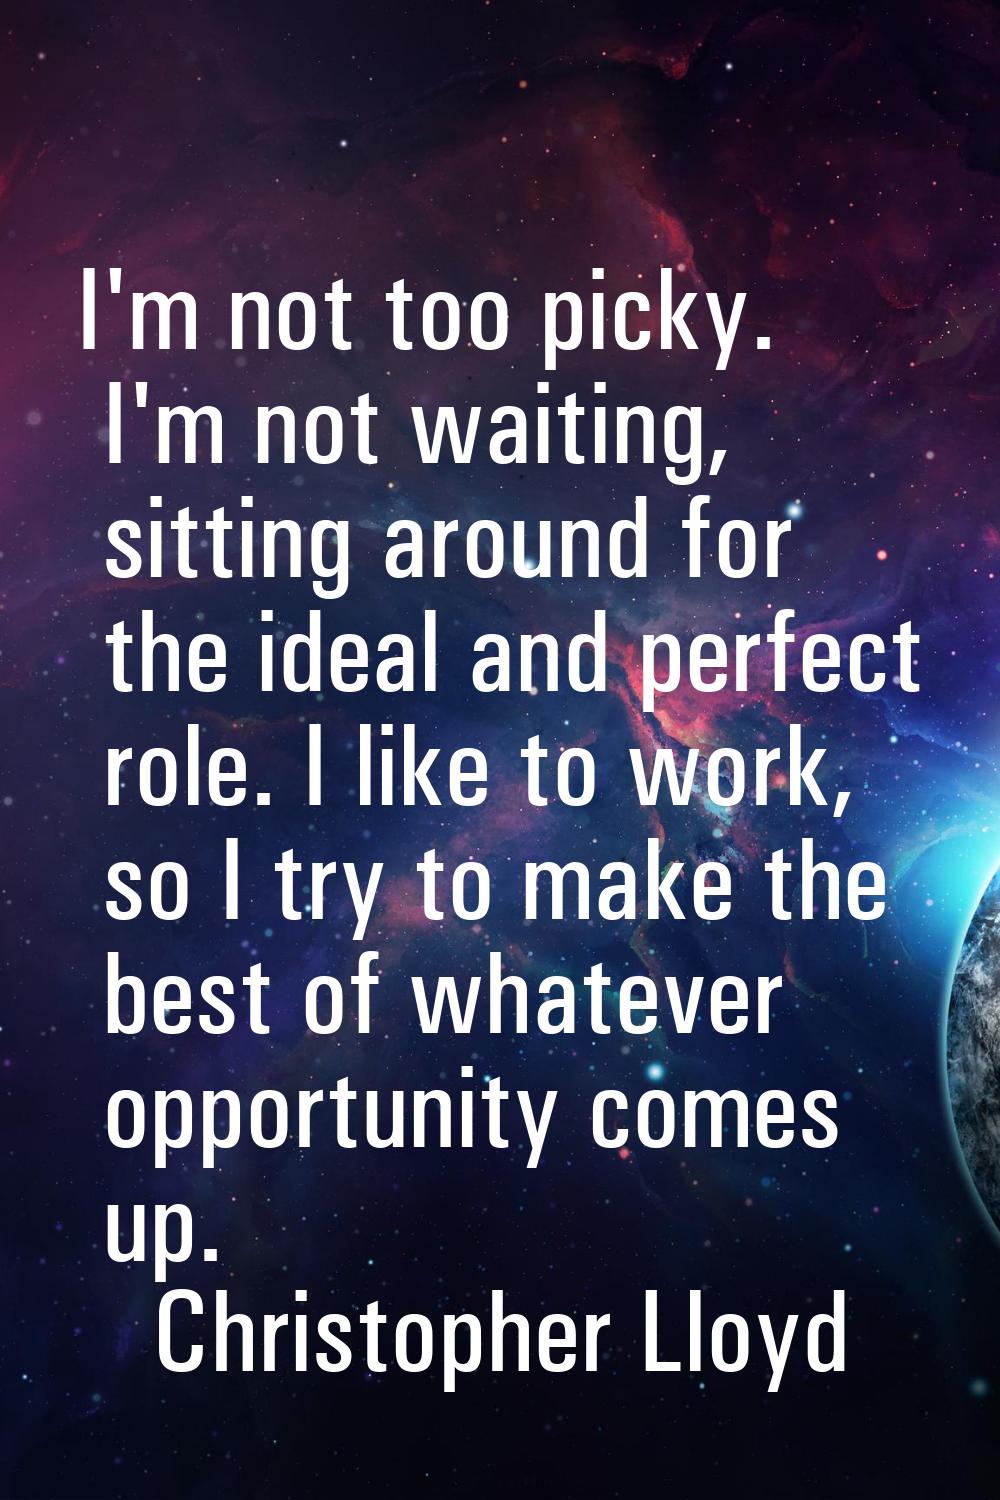 I'm not too picky. I'm not waiting, sitting around for the ideal and perfect role. I like to work, 